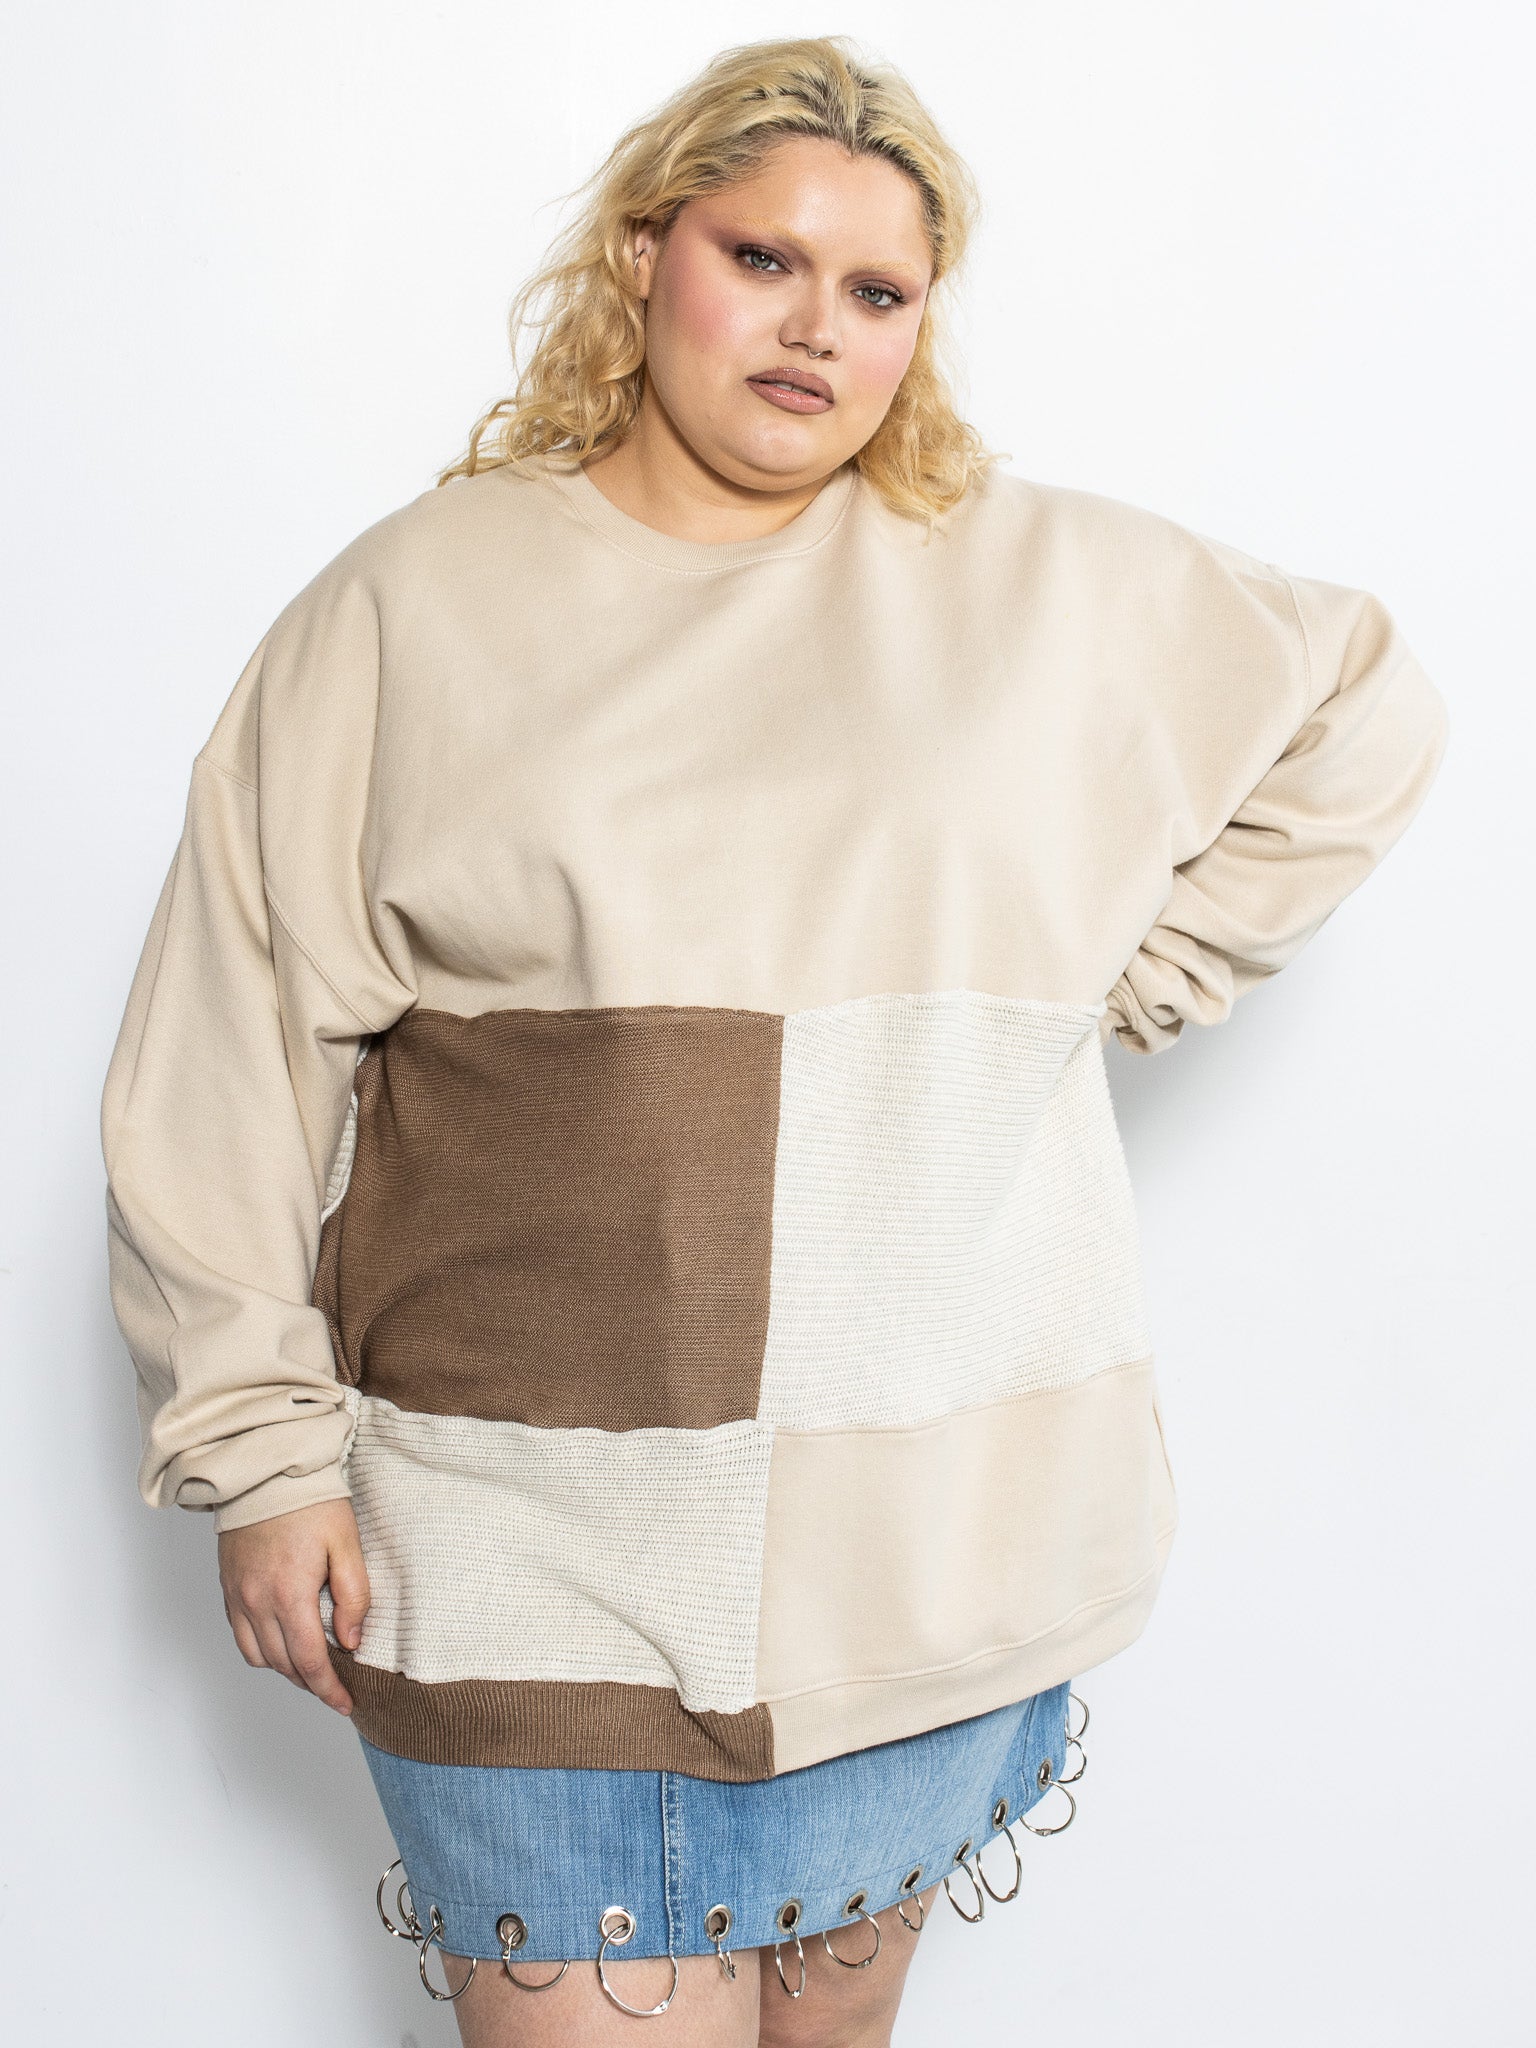 Playback Threads - Taylor Sweater (3X)